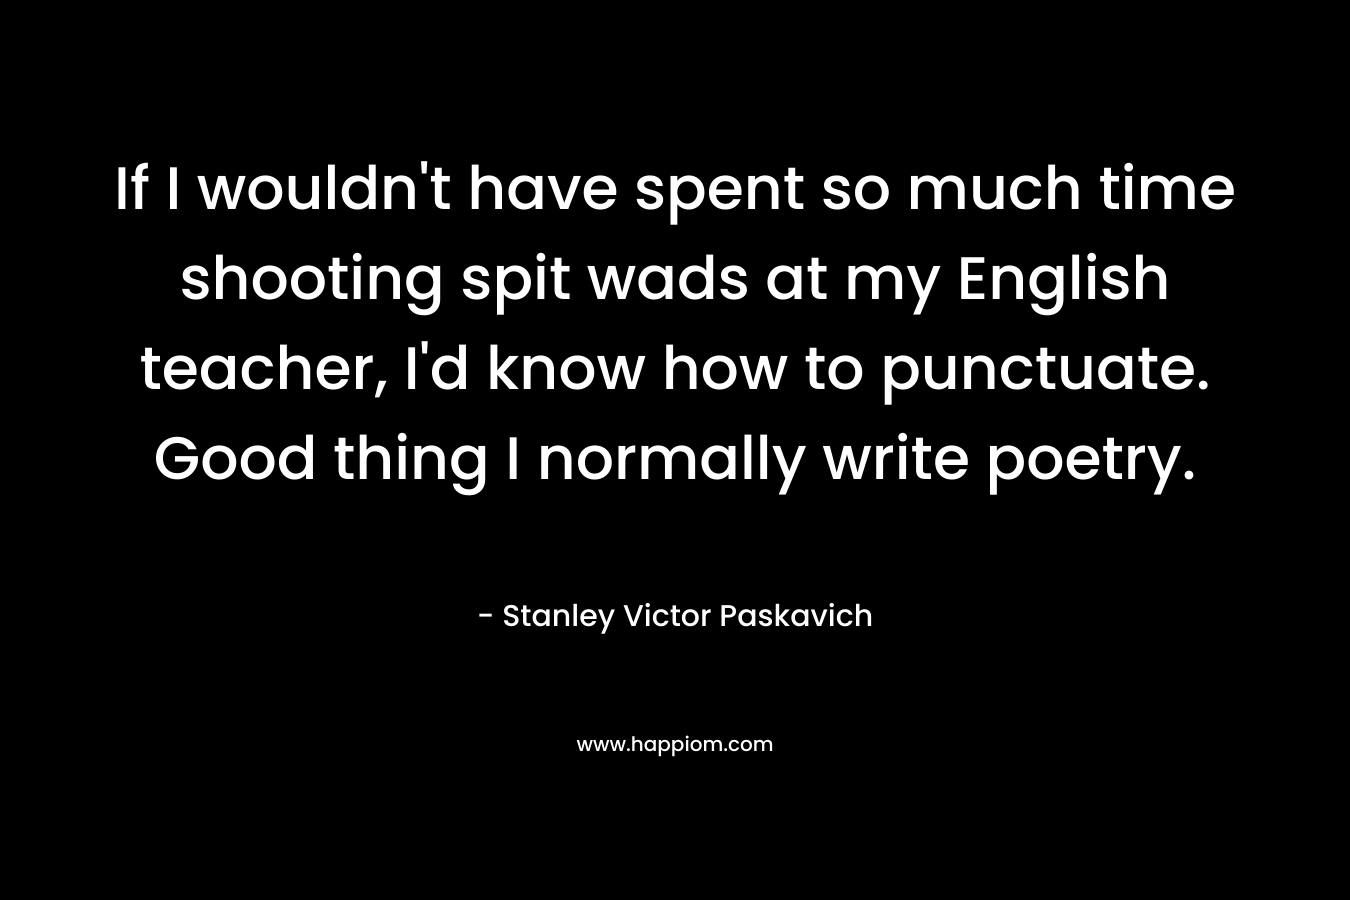 If I wouldn't have spent so much time shooting spit wads at my English teacher, I'd know how to punctuate. Good thing I normally write poetry.